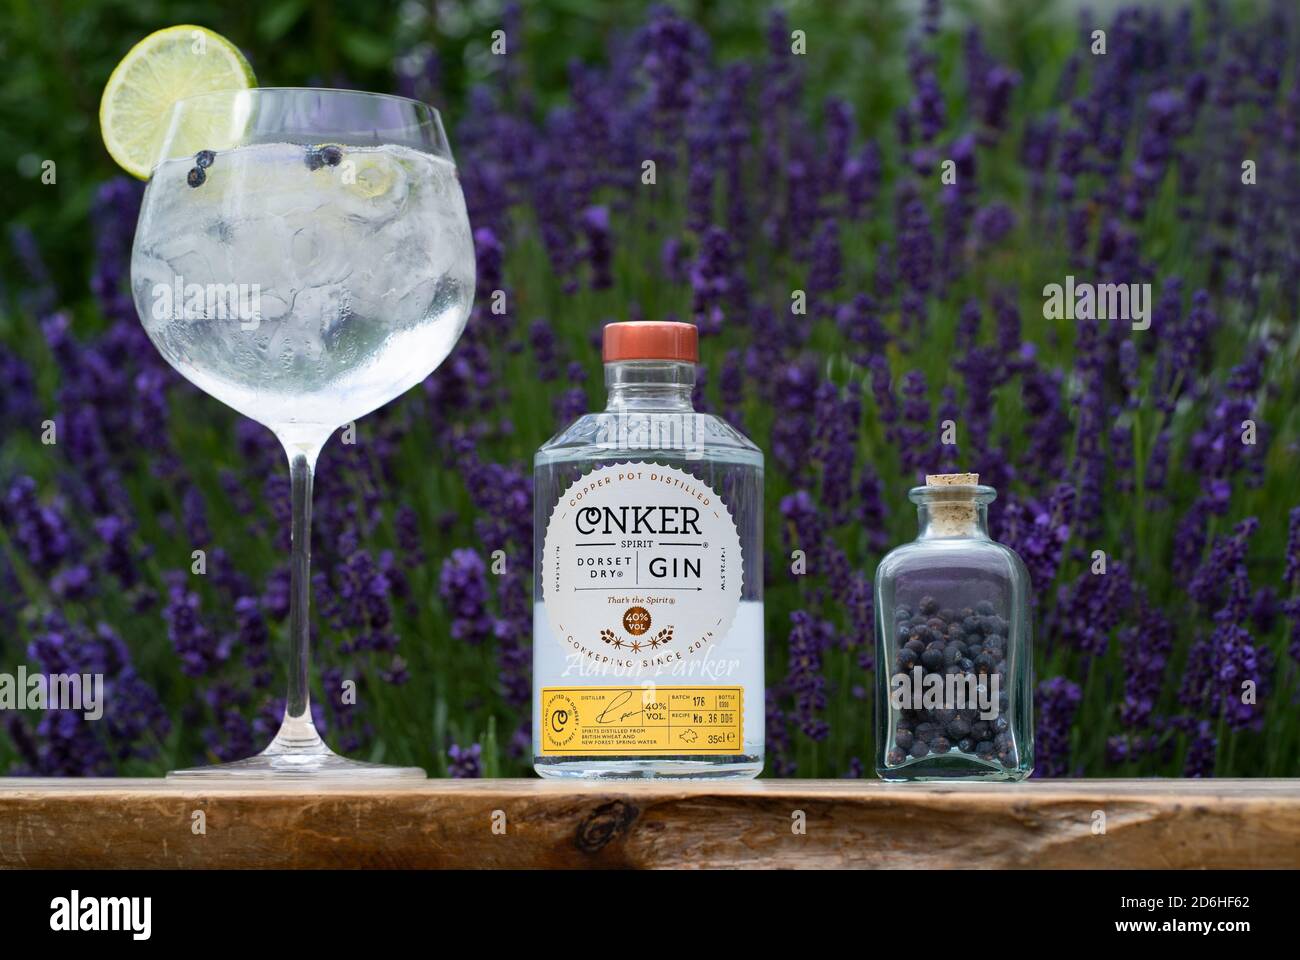 Dorset Conker Gin and tonic drink with natural lavender background in the summer. Gin bottle with large gin and tonic glass containing ice and lemon. Stock Photo